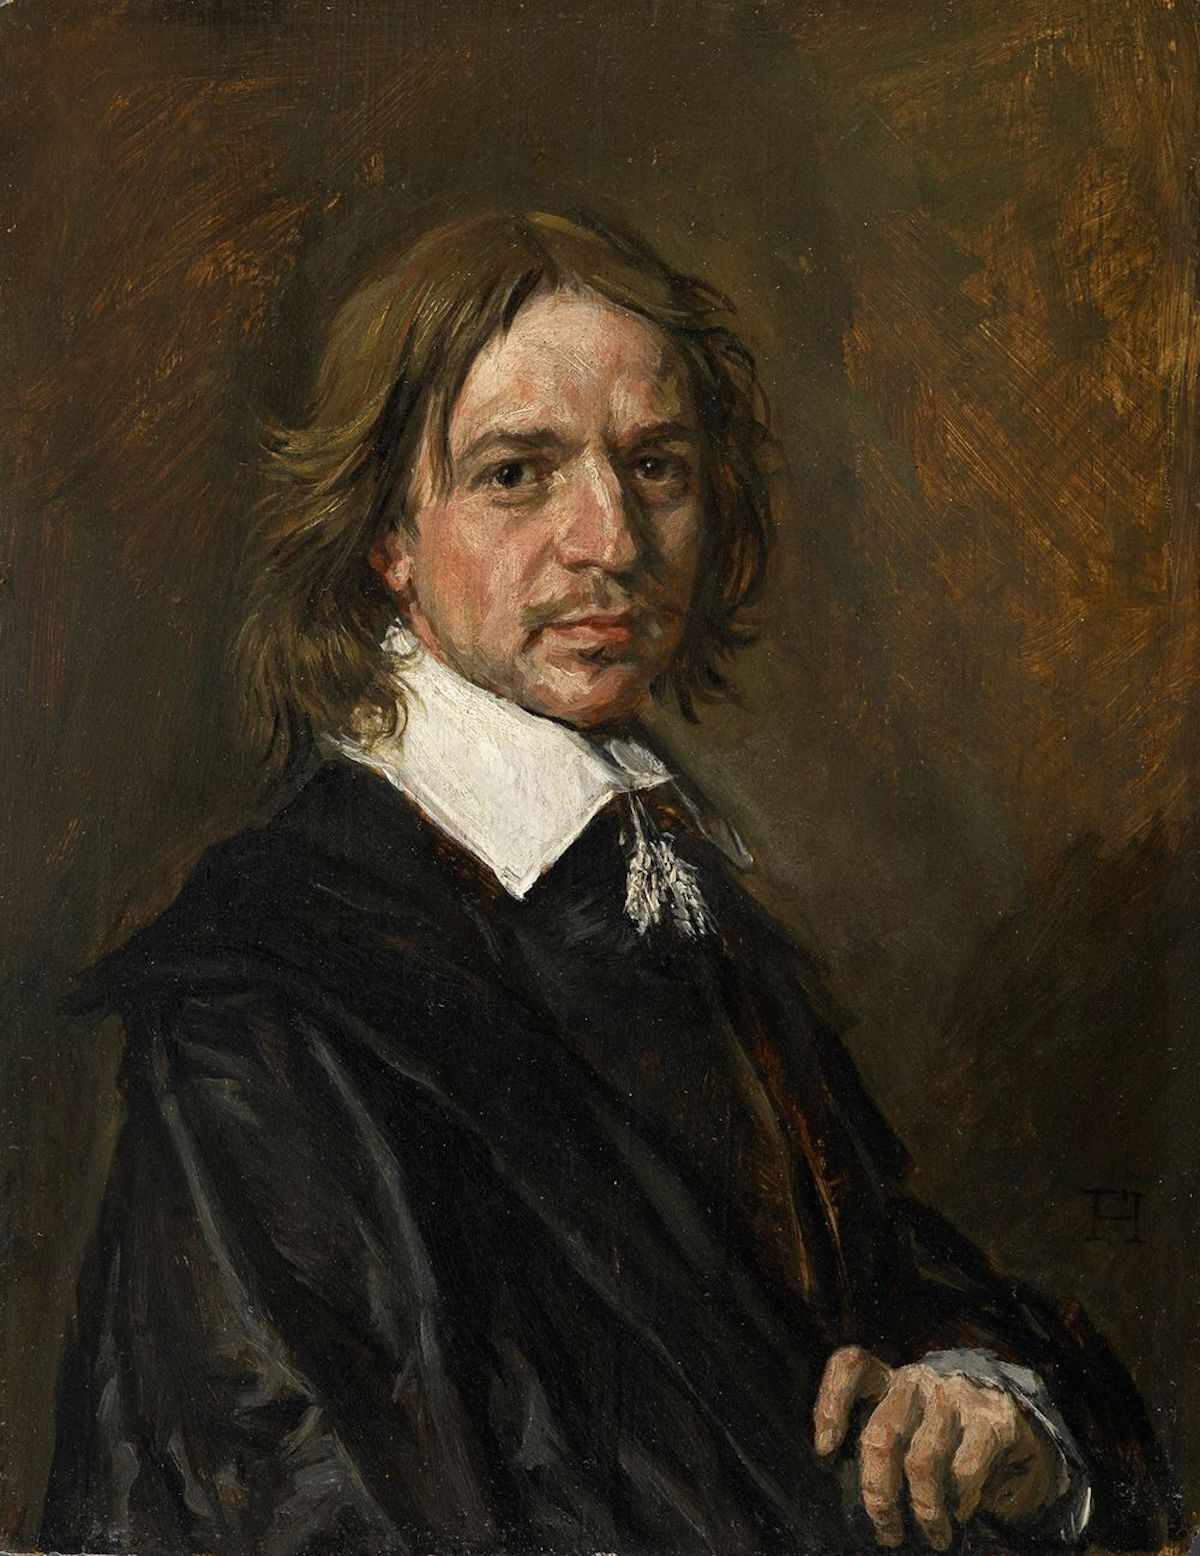 A painting formerly believed to be a portrait by Frans Hals, now believed to be a modern forgery. Image via Wikimedia Commons.